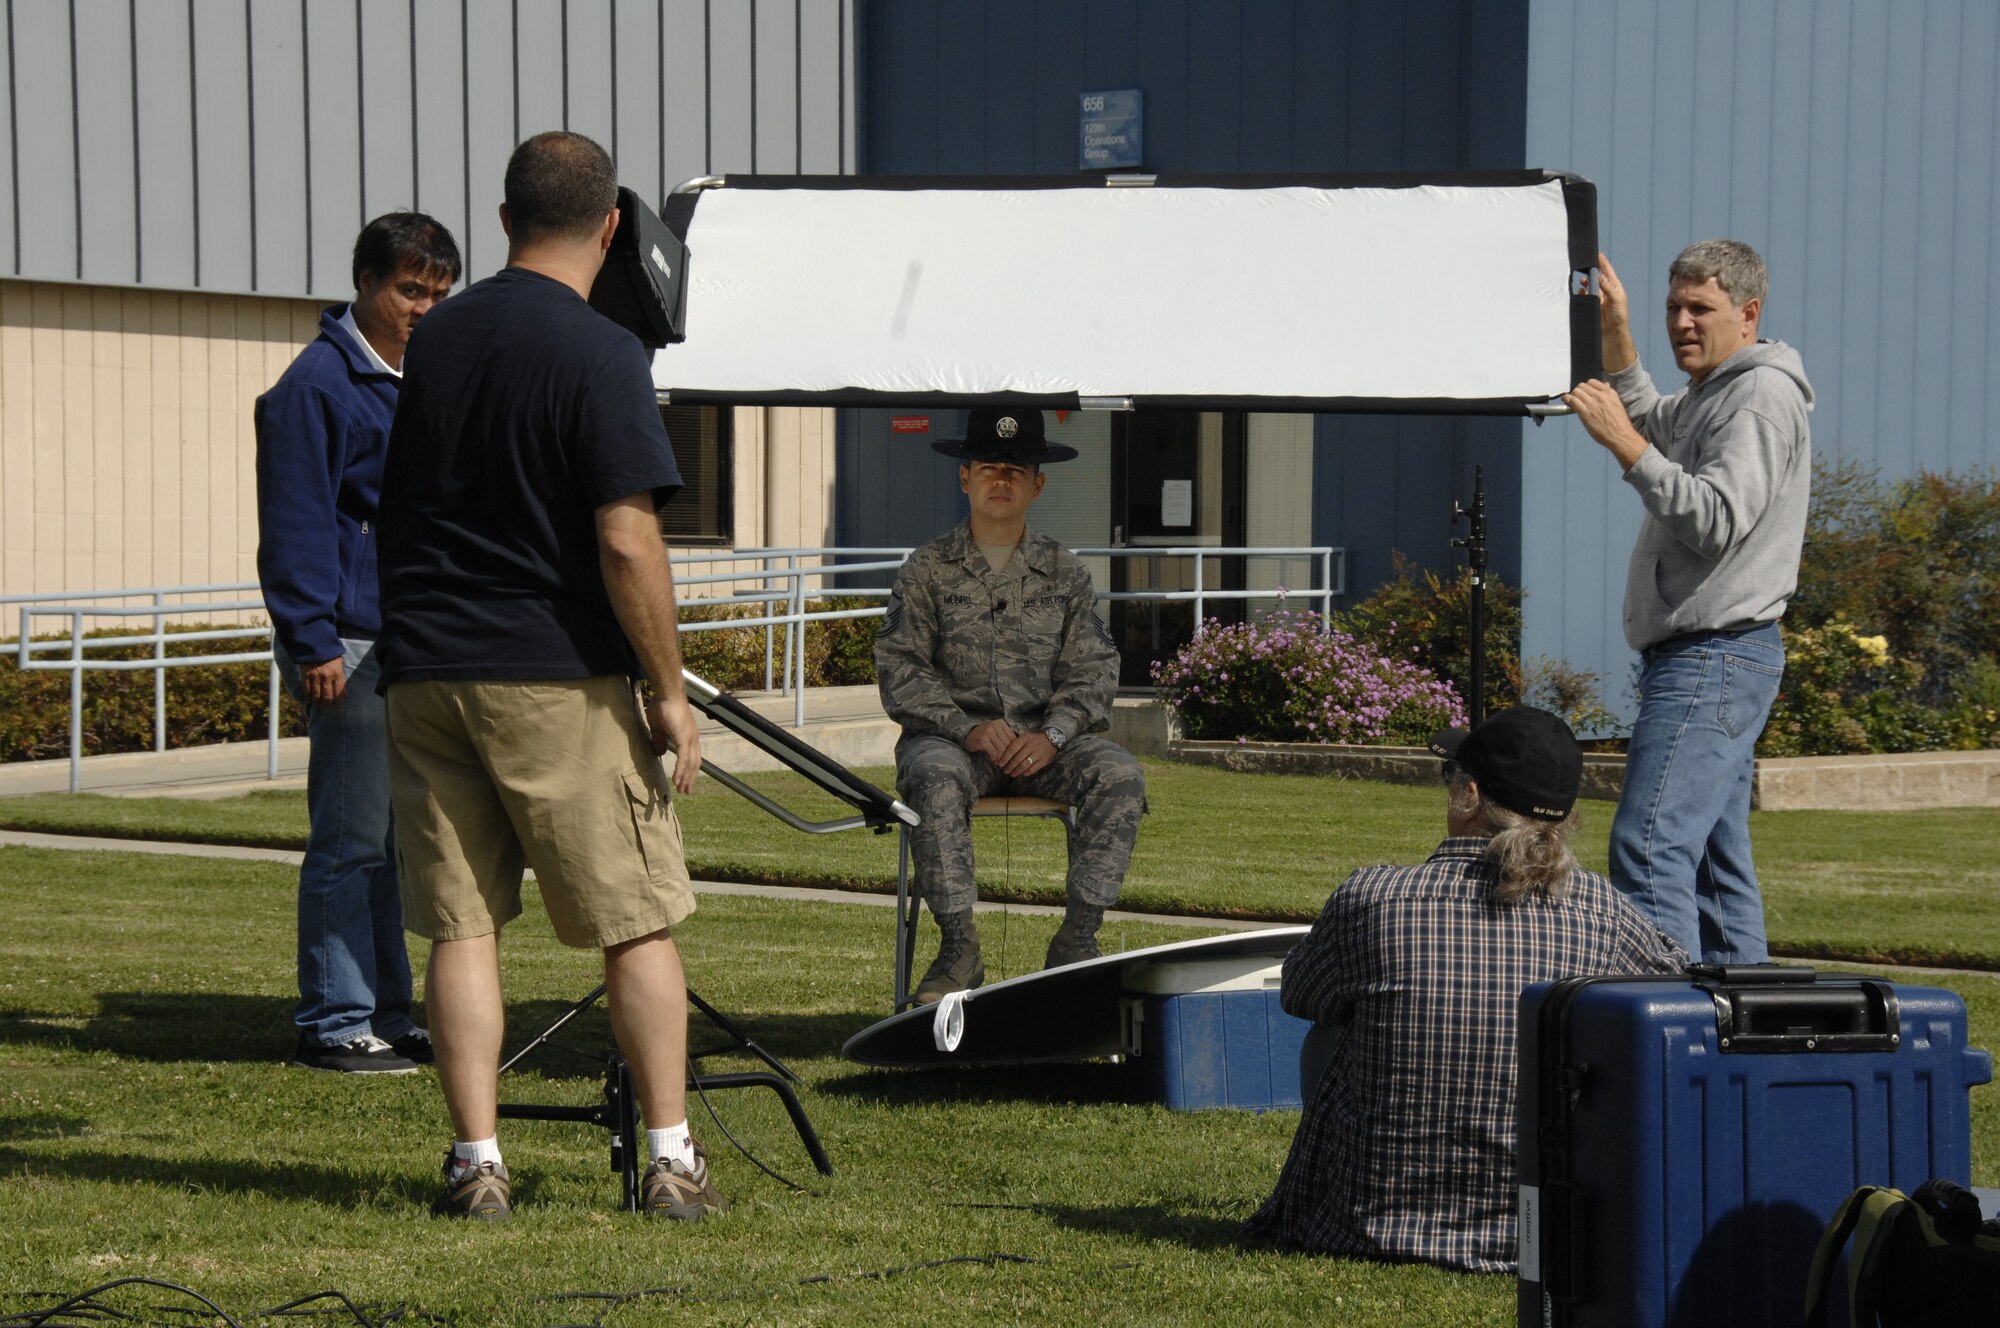 Members from the Air National Guard Advertising and Marketing team set up video equipment for an interview with Master Sgt. Alan Munro, a former military training instructor and a member of the 129th Medical Group, during a video and photo shoot for the redesign of GoANG.com at Moffett Federal Airfield, Calif., Aug. 1, 2009.  (Air National Guard photo by Senior Airman Shane Burke)